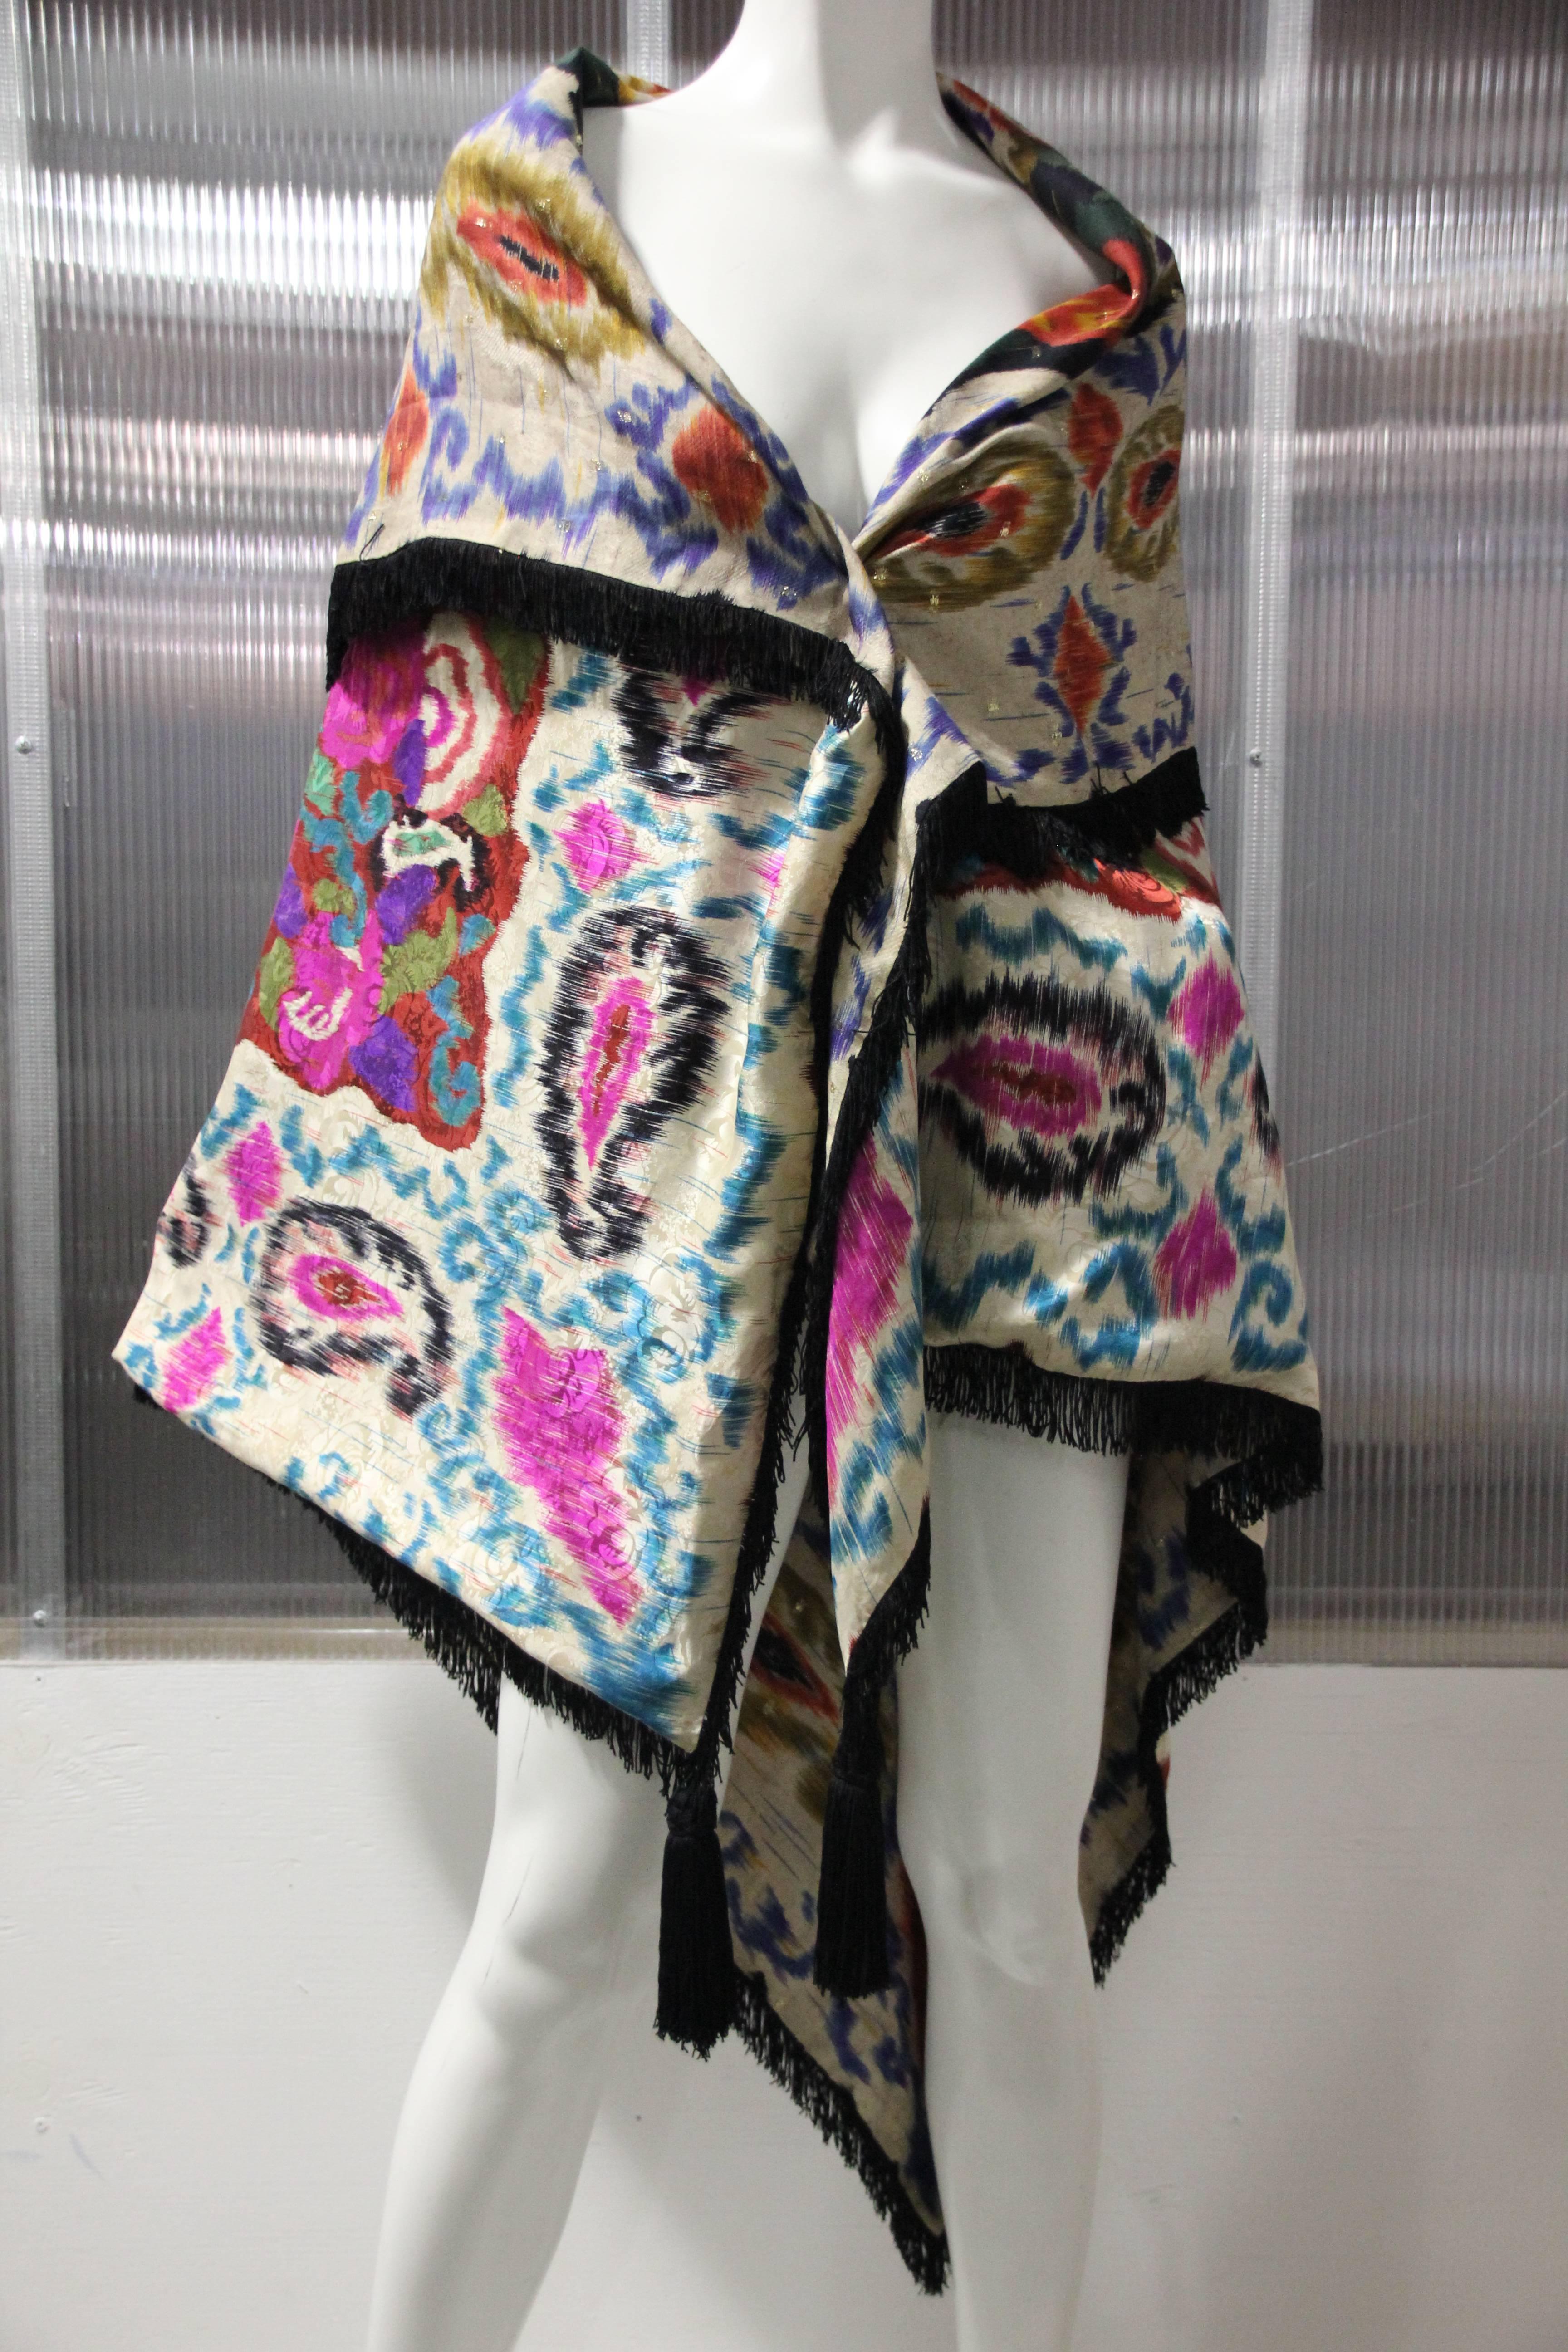 1980's Ungaro of Paris made in Italy silk paisley and floral pattern double-sided large shawl is trimmed in black rayon fringe with large tassels at front points.
This stunning and vibrant large silk shawl can be worn in many ways and can be folded